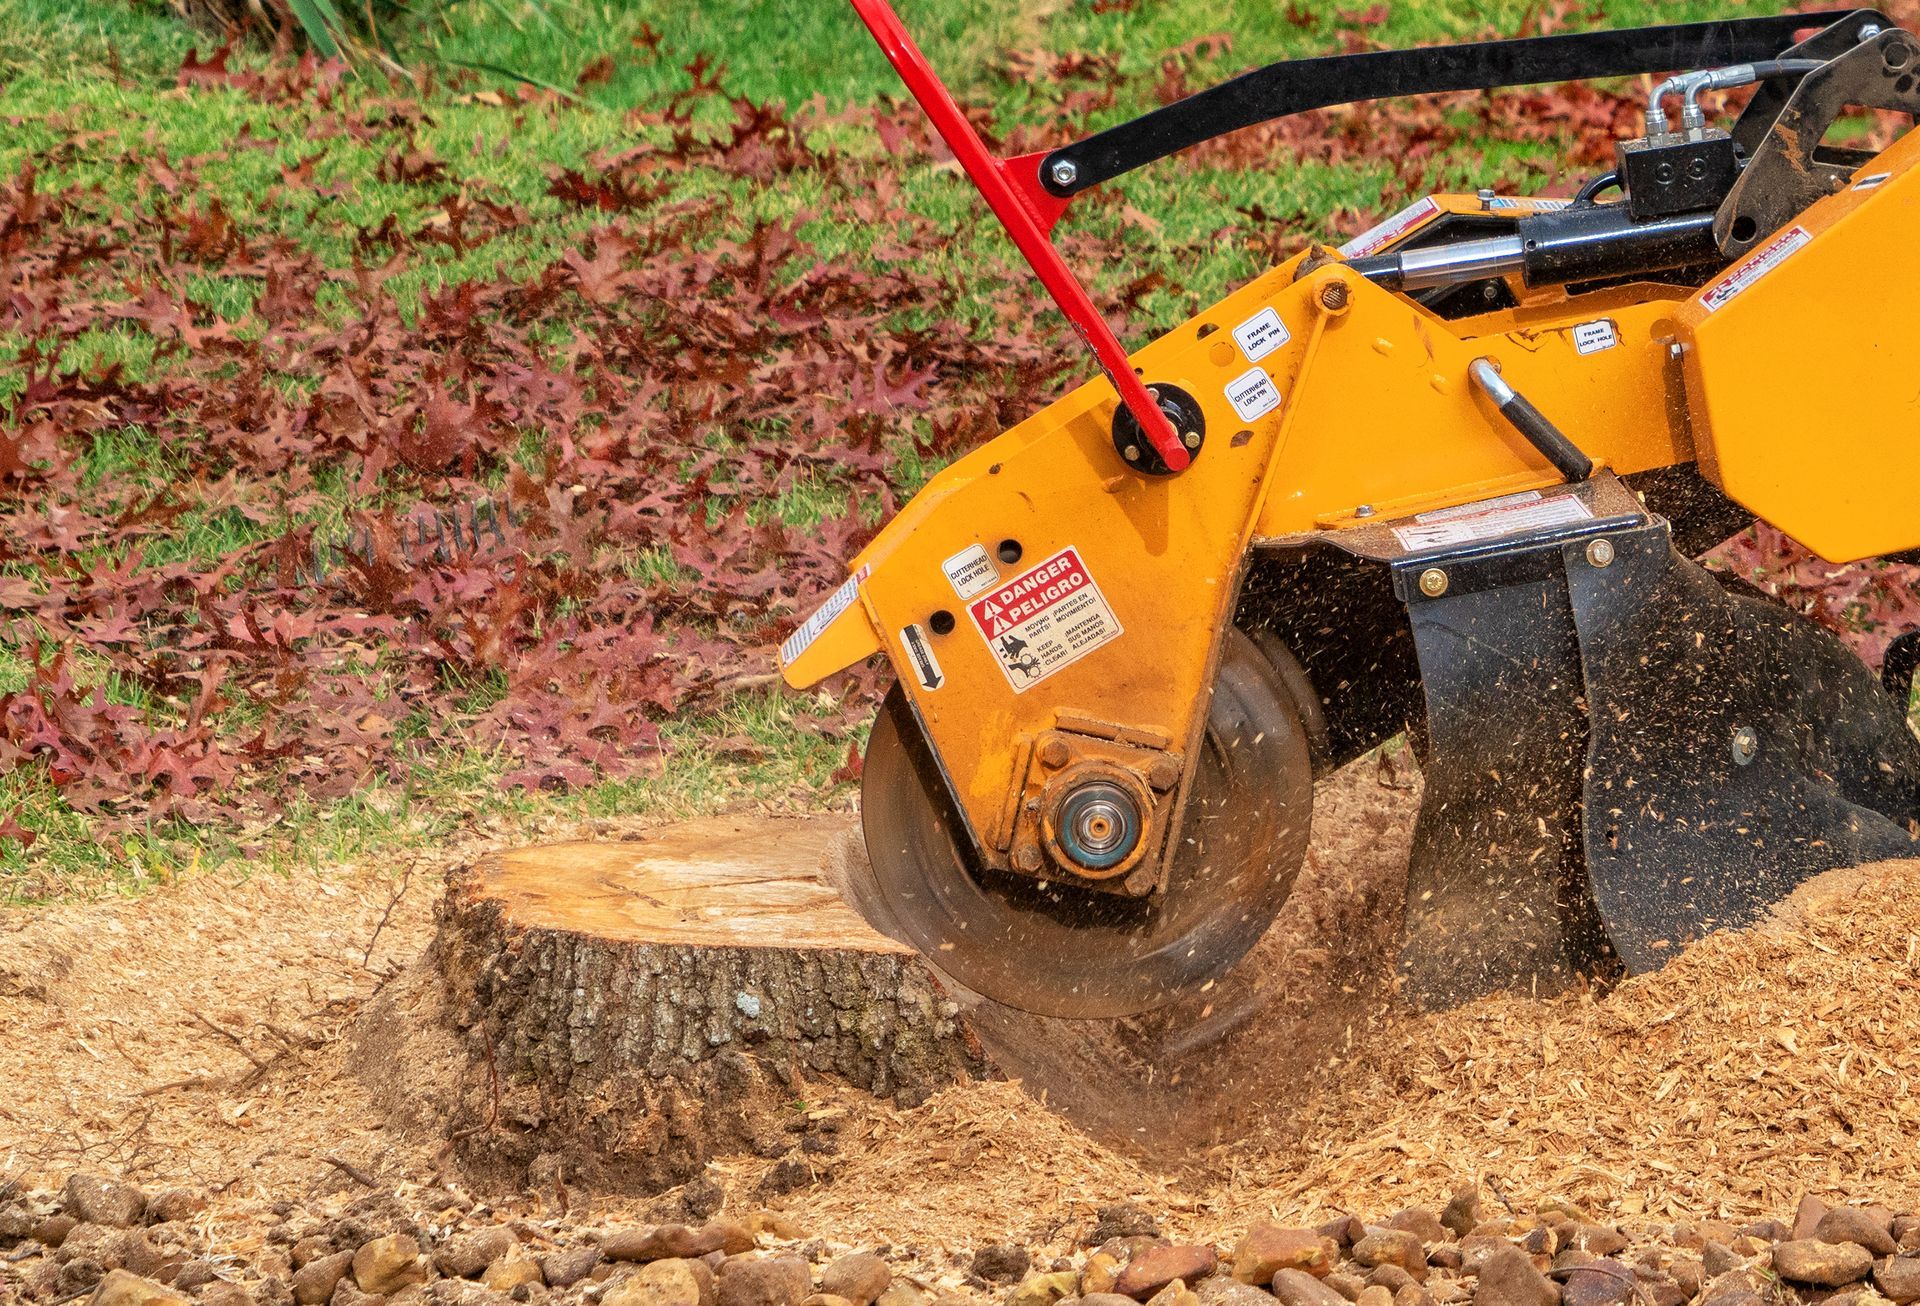 Specialized equipment for stump grinding